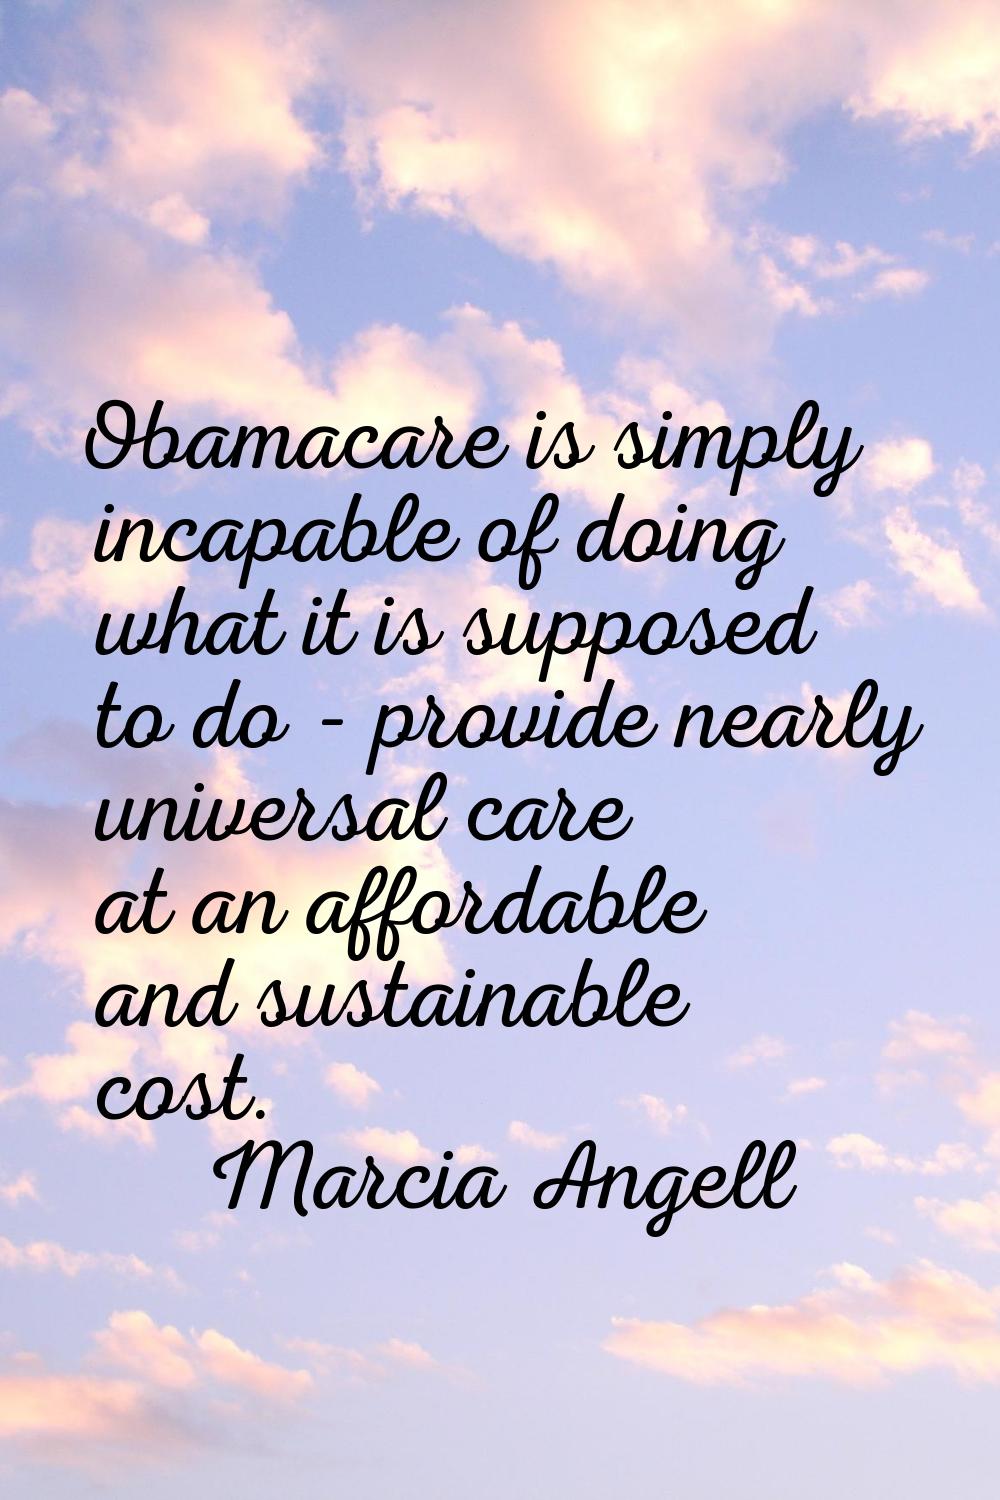 Obamacare is simply incapable of doing what it is supposed to do - provide nearly universal care at